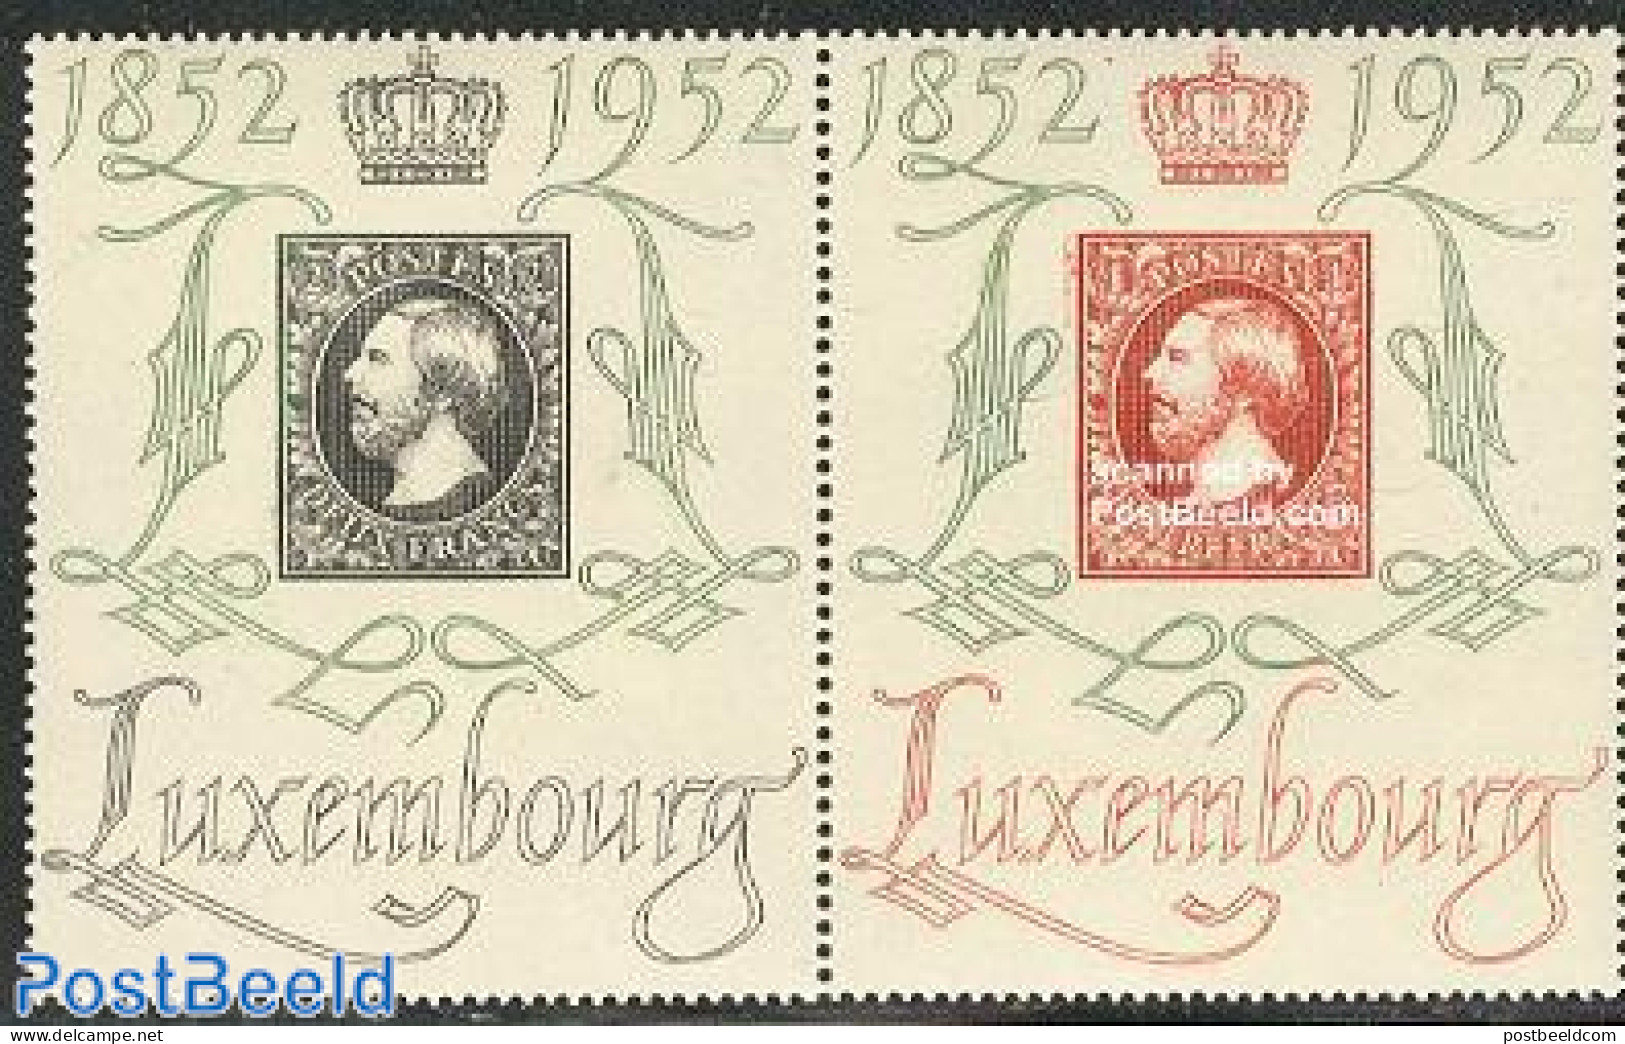 Luxemburg 1952 Centilux 2v [:], Unused (hinged), 100 Years Stamps - Philately - Stamps On Stamps - Ongebruikt